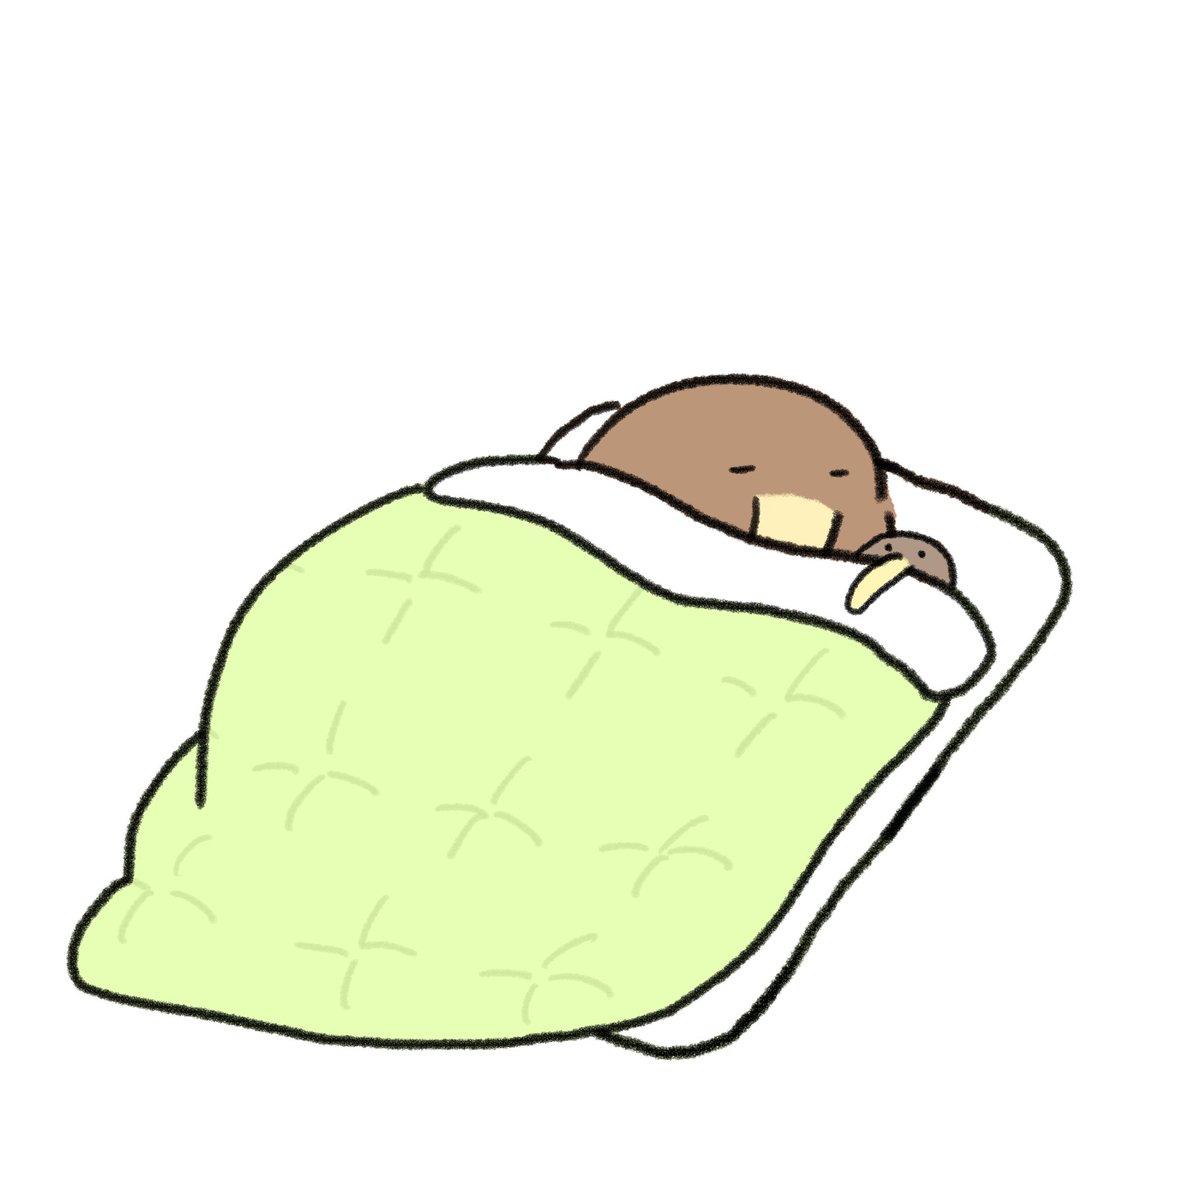 no humans white background simple background animal focus sleeping under covers closed eyes  illustration images